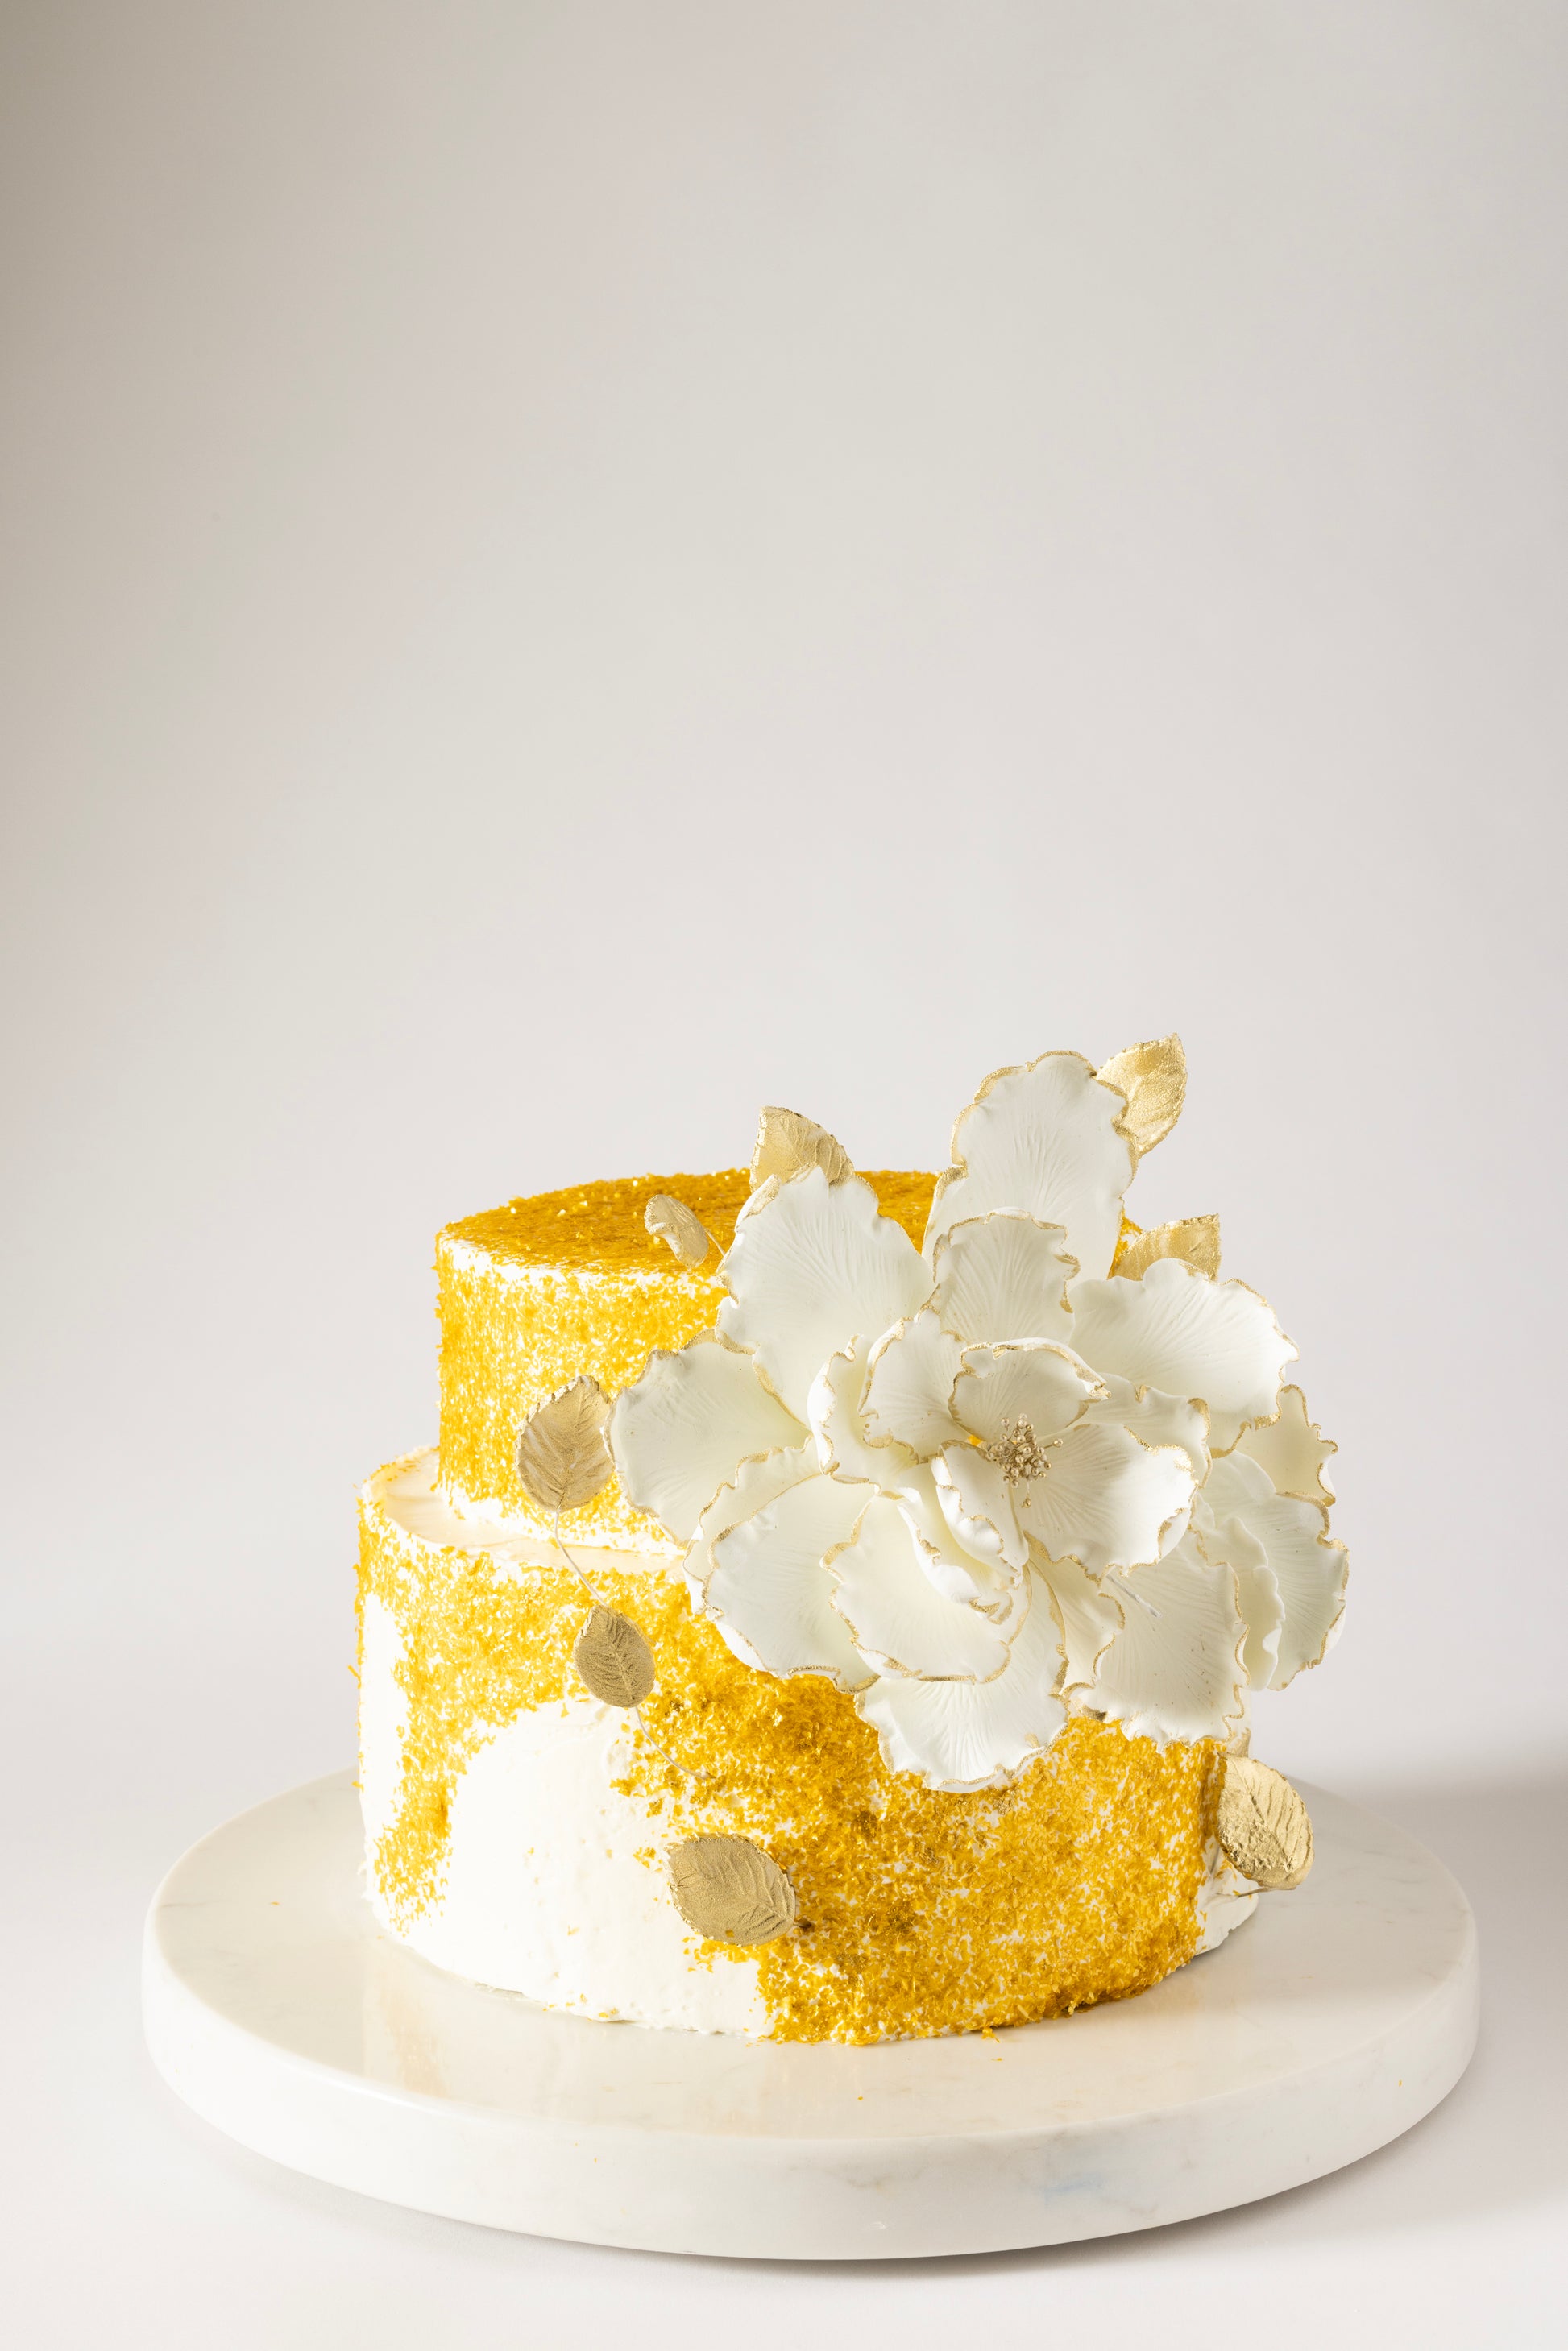 Simple Gold Leaf: Build Your Own Cake